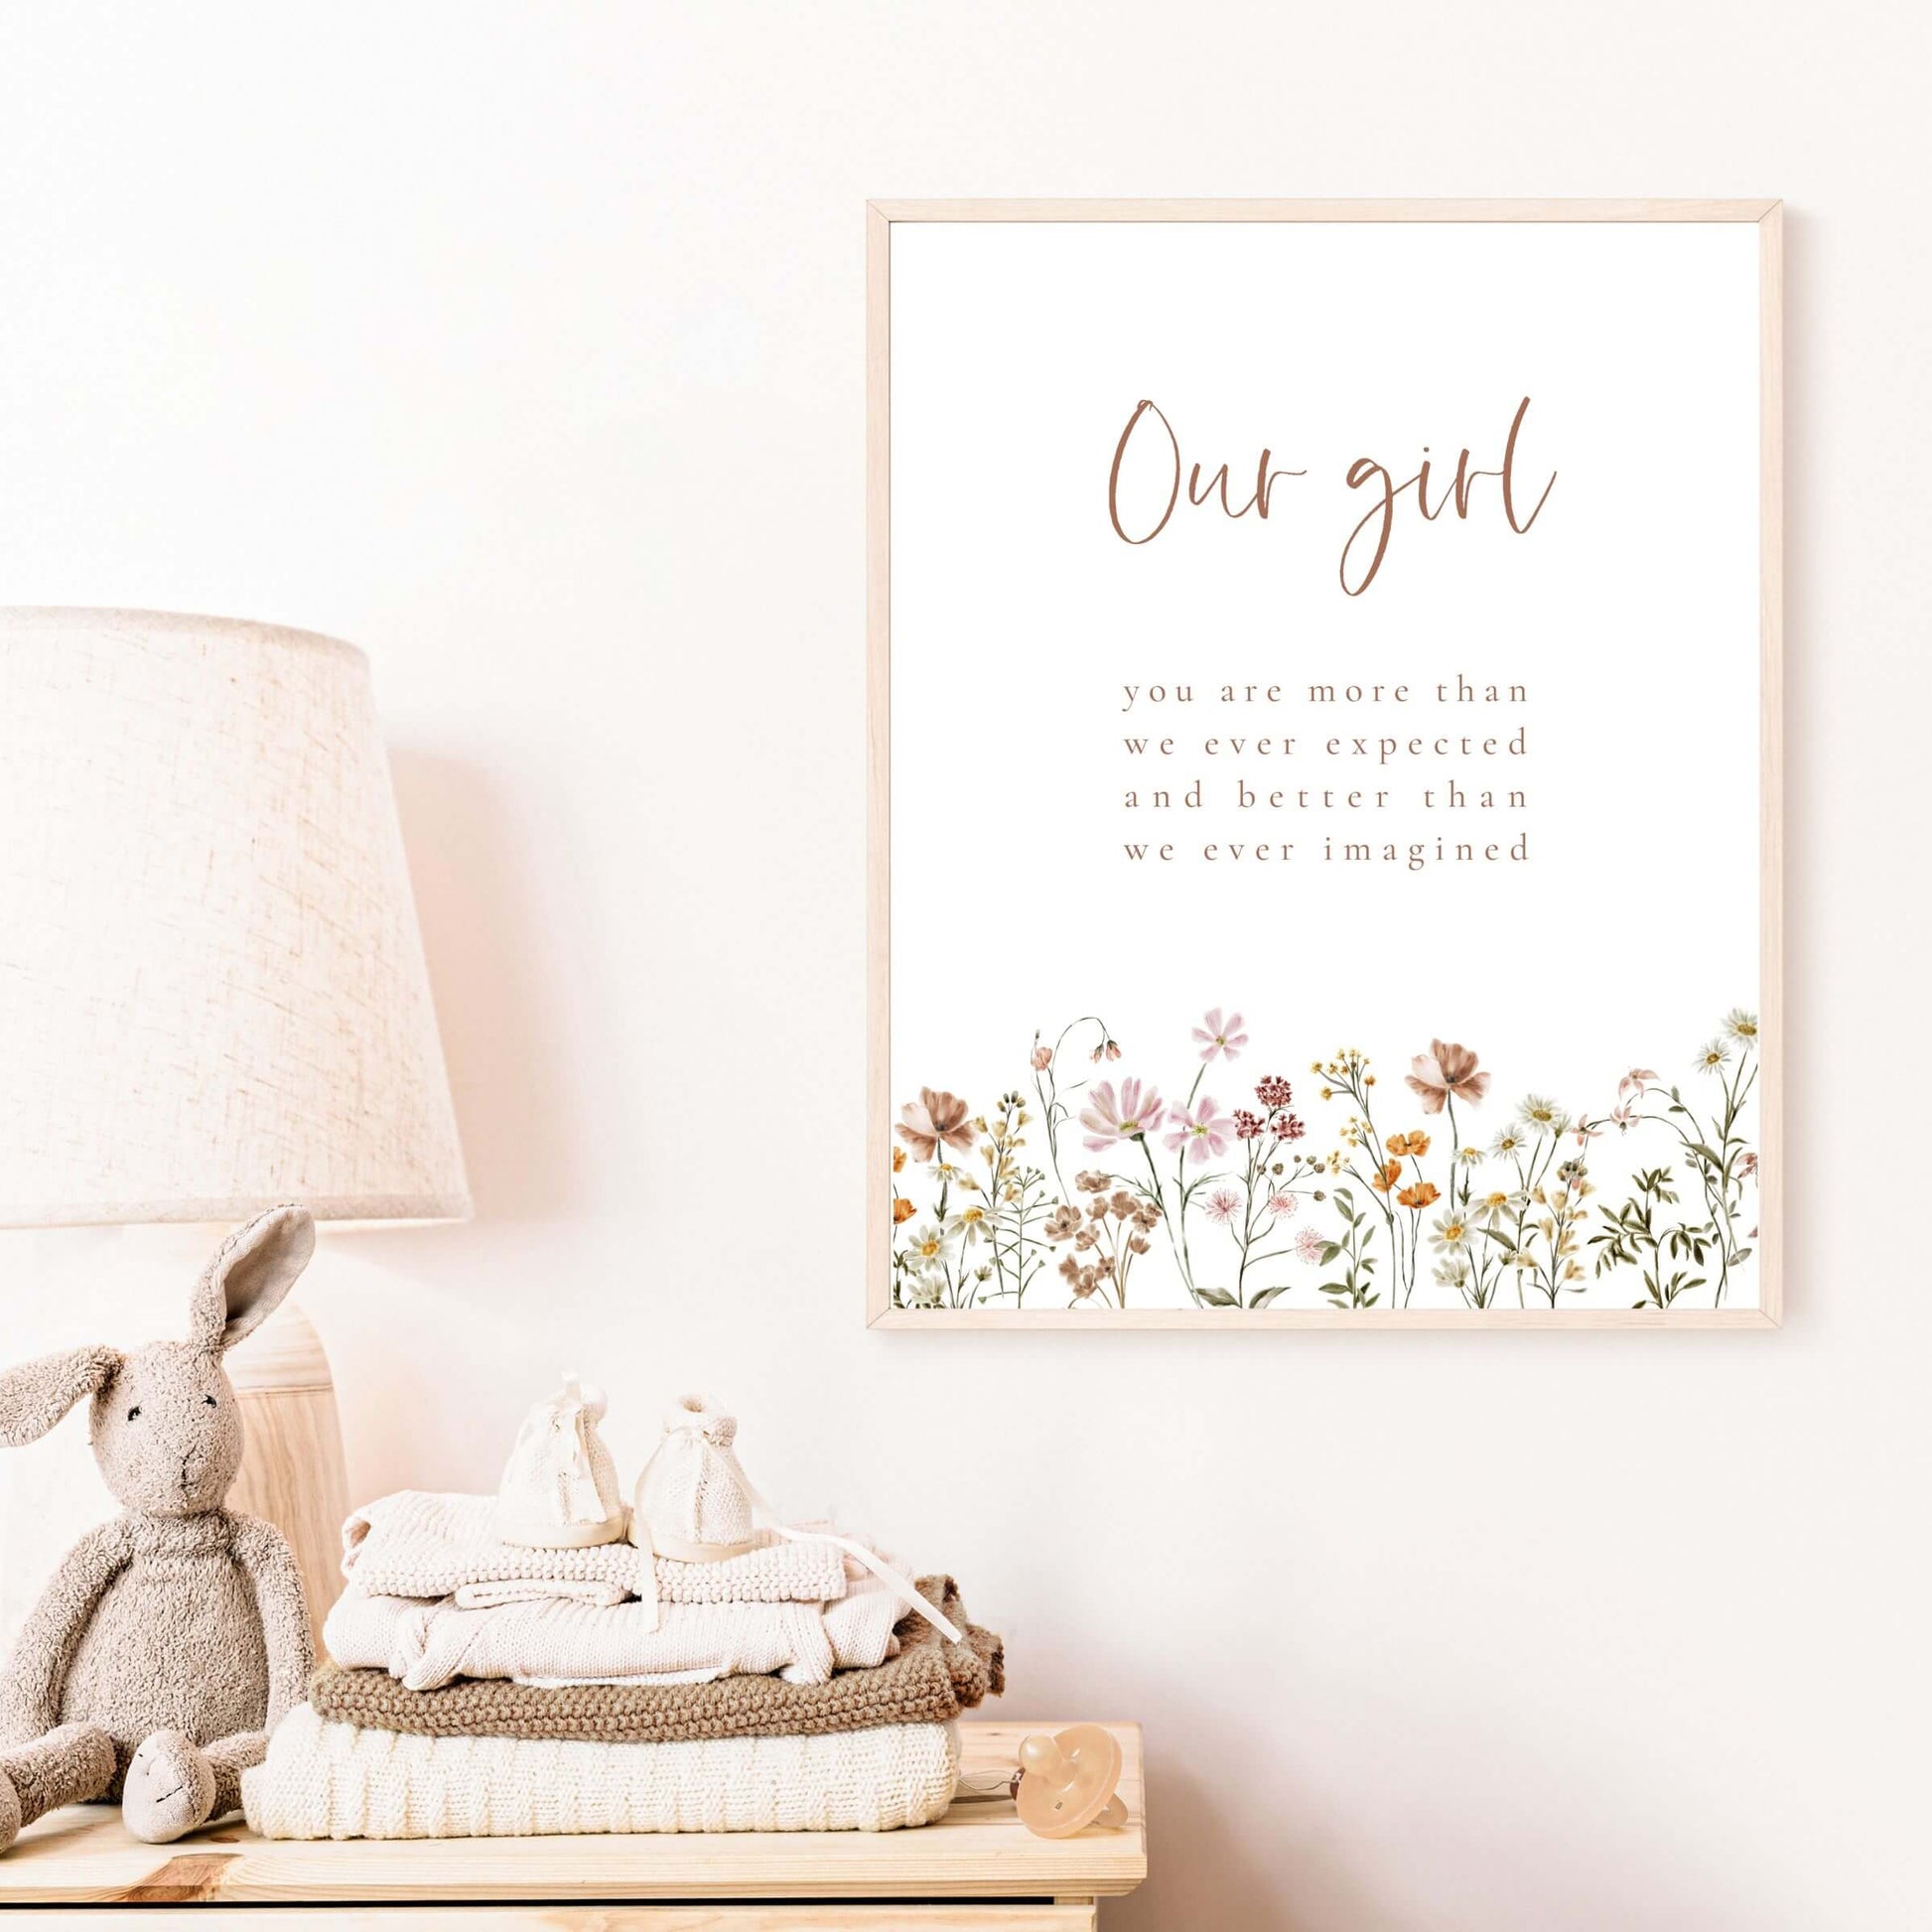 Our girl wall art with wildflowers in a wood frame hanging on the wall in a nursery